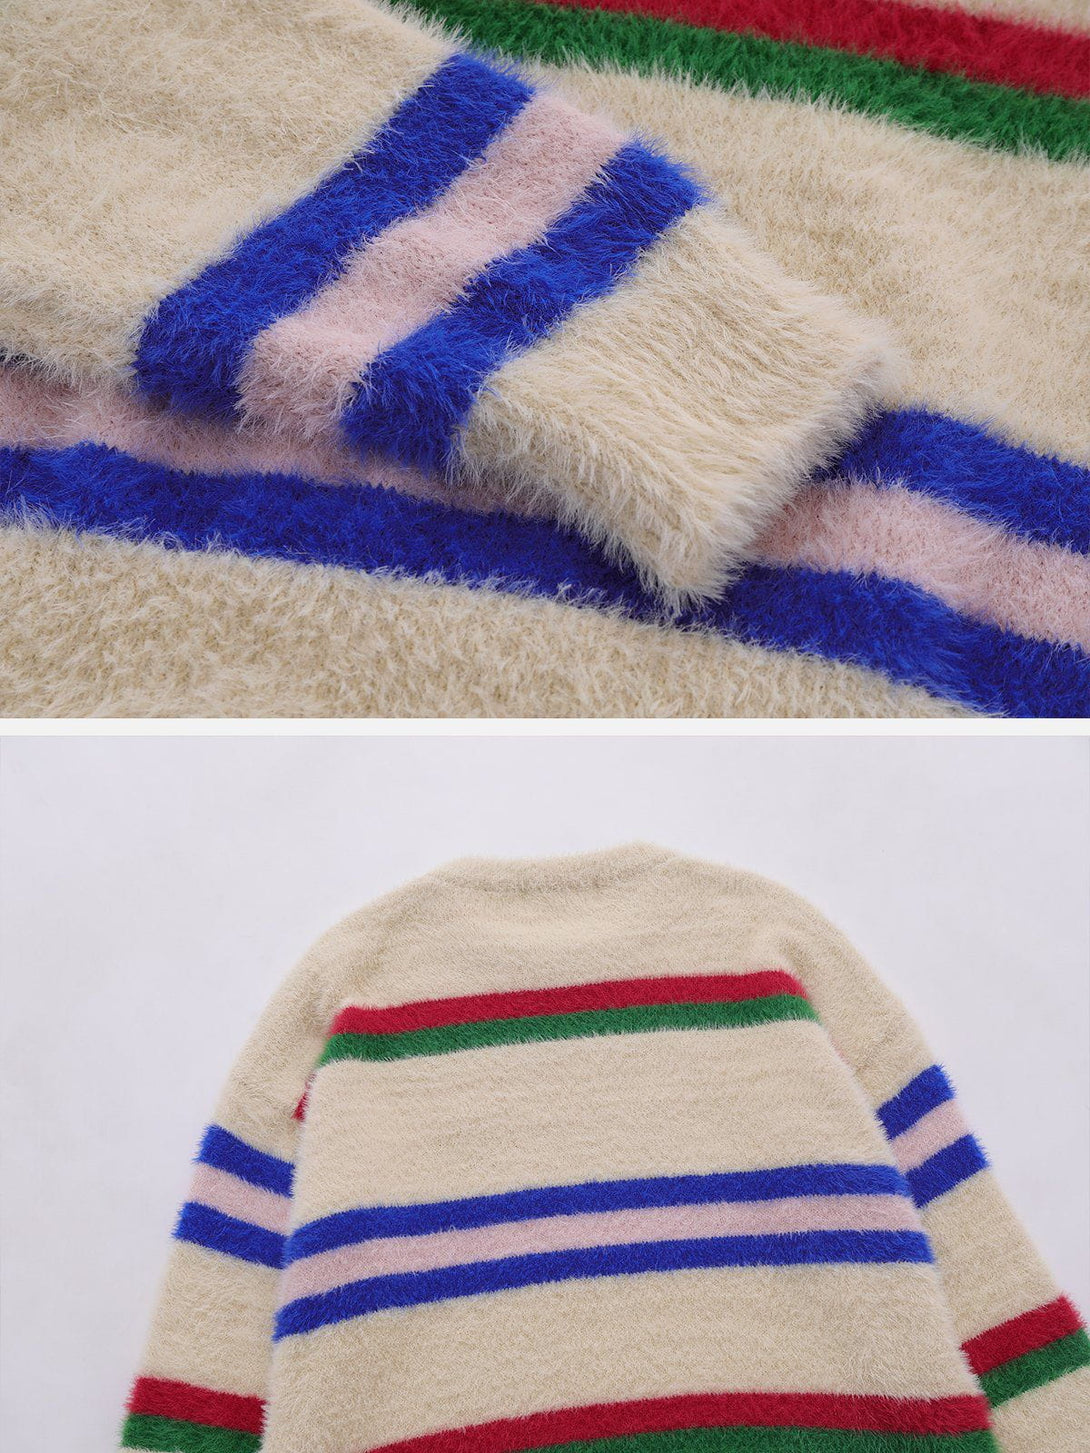 Levefly - Colorful Striped Letter Sweater - Streetwear Fashion - levefly.com